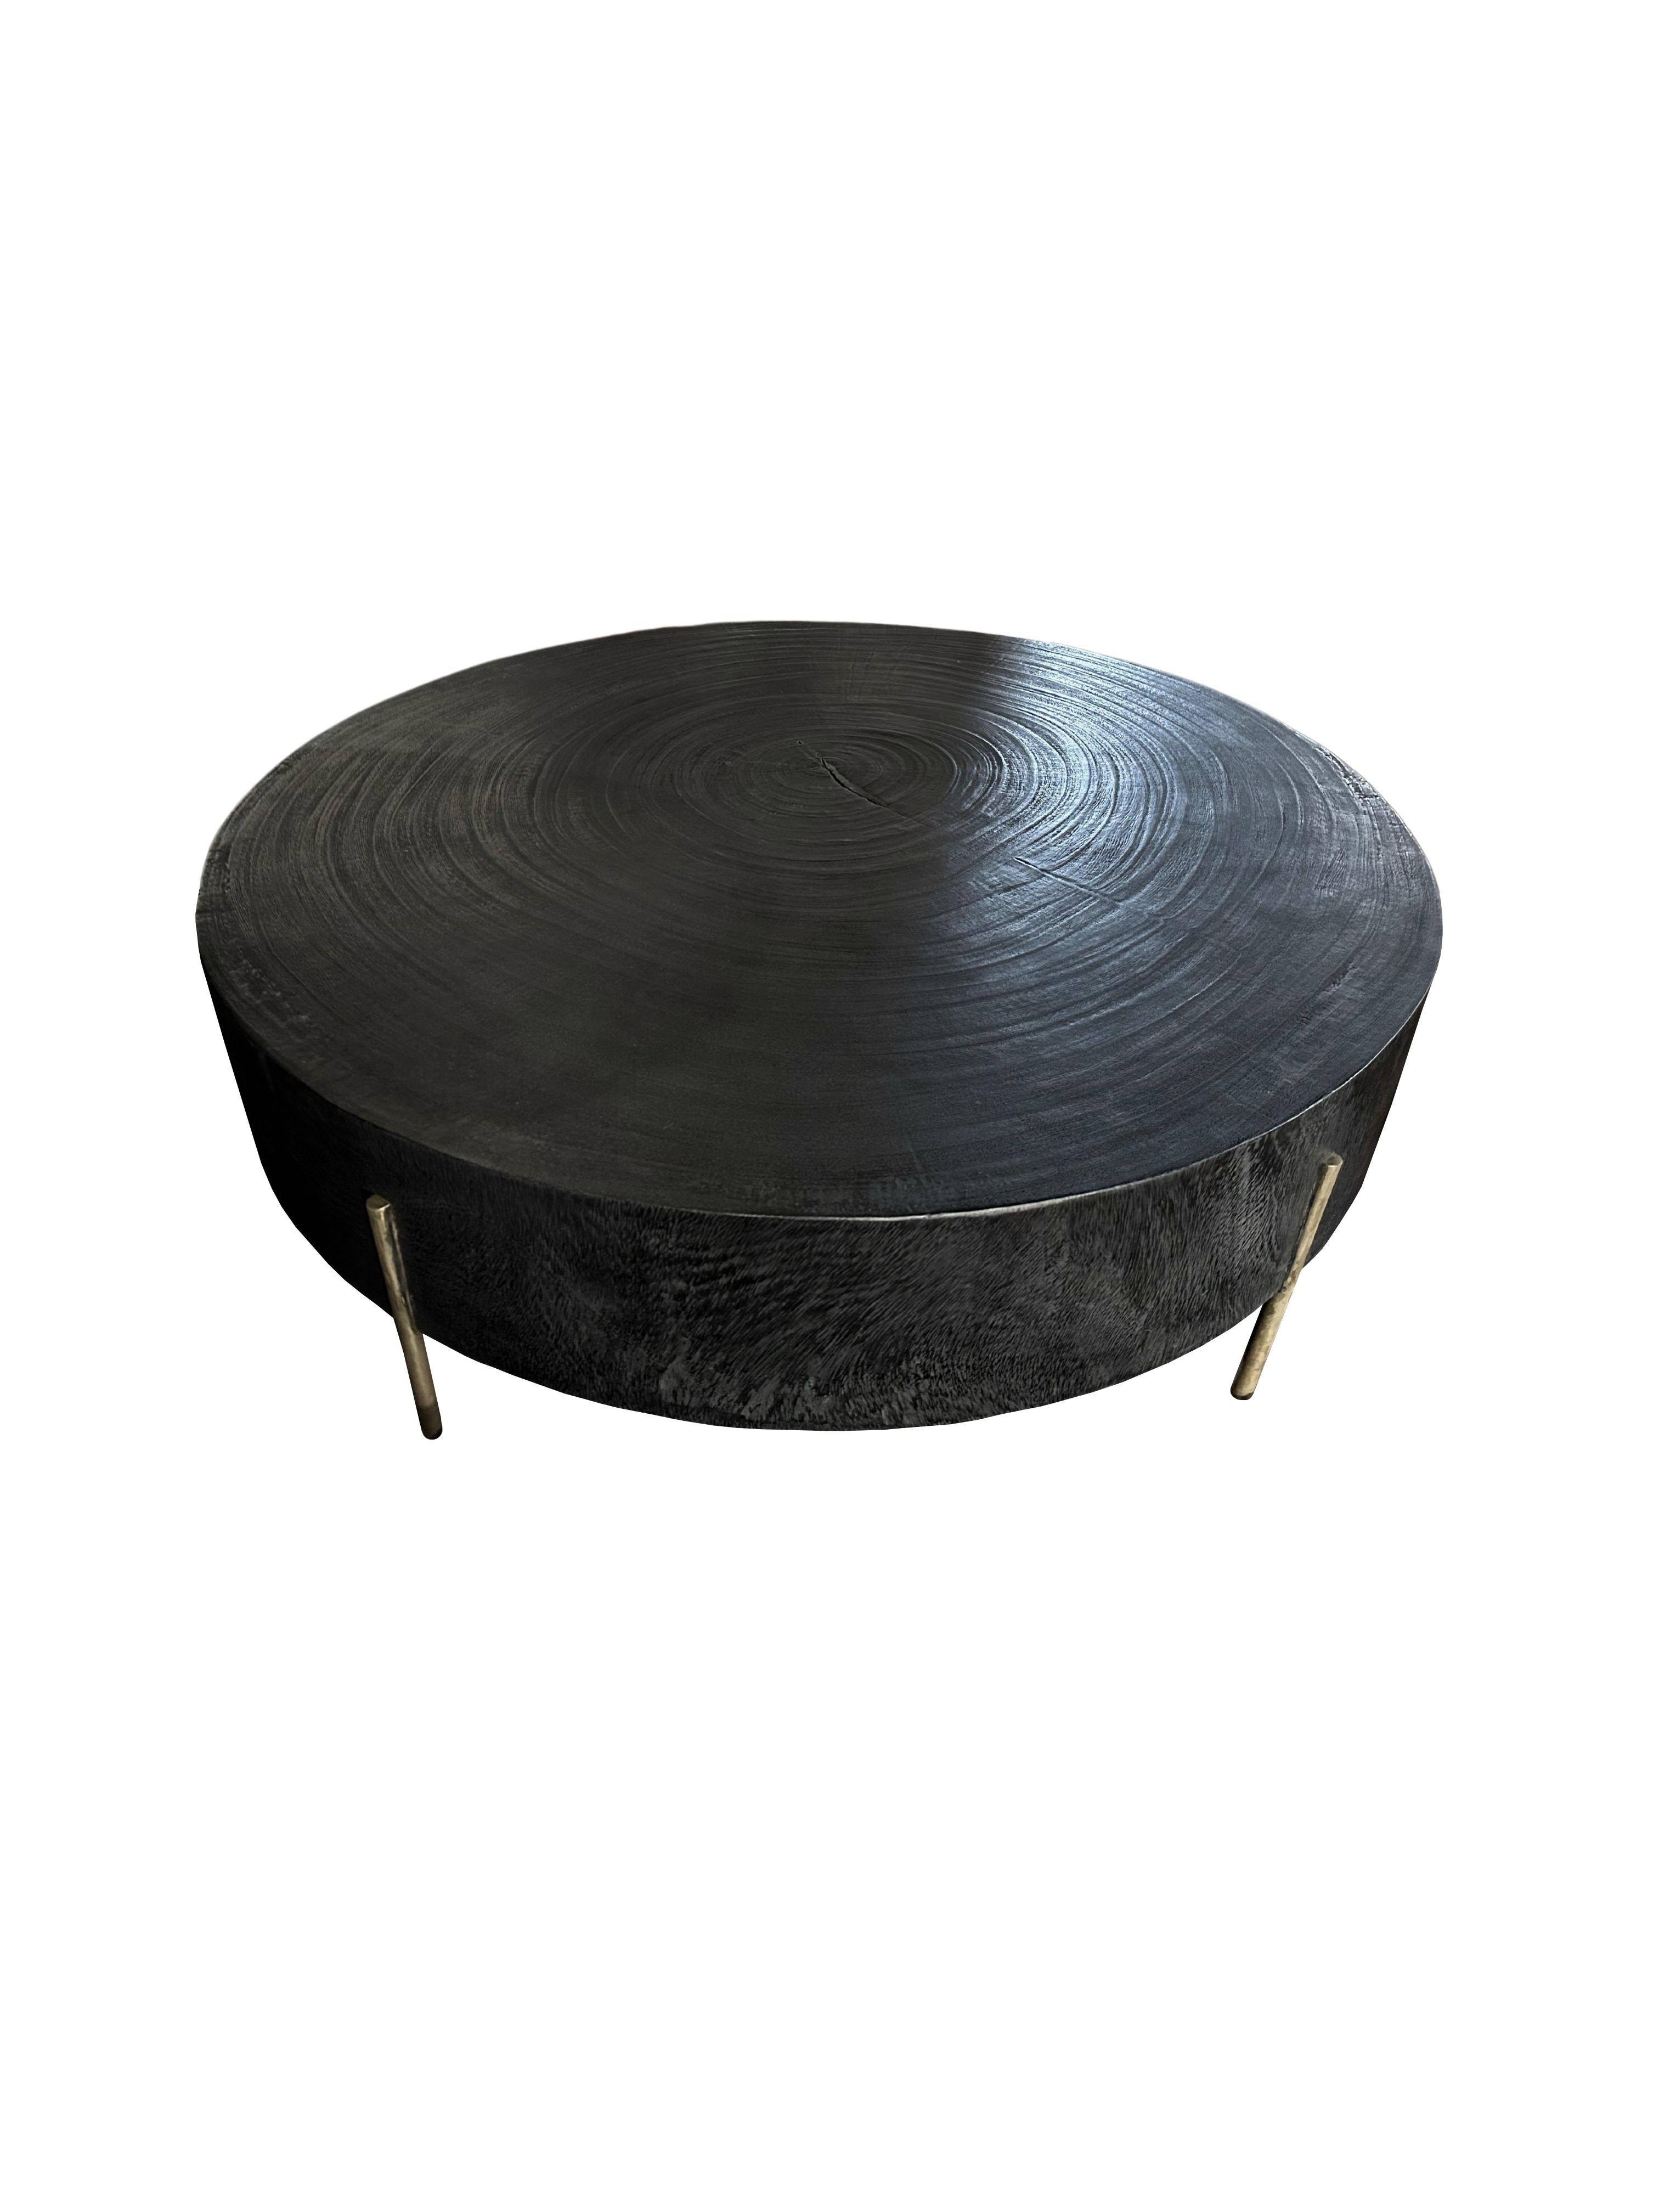 Hand-Crafted Modern Organic Side Table Crafted from Mango Wood with Brass Legs, Burnt Finish For Sale